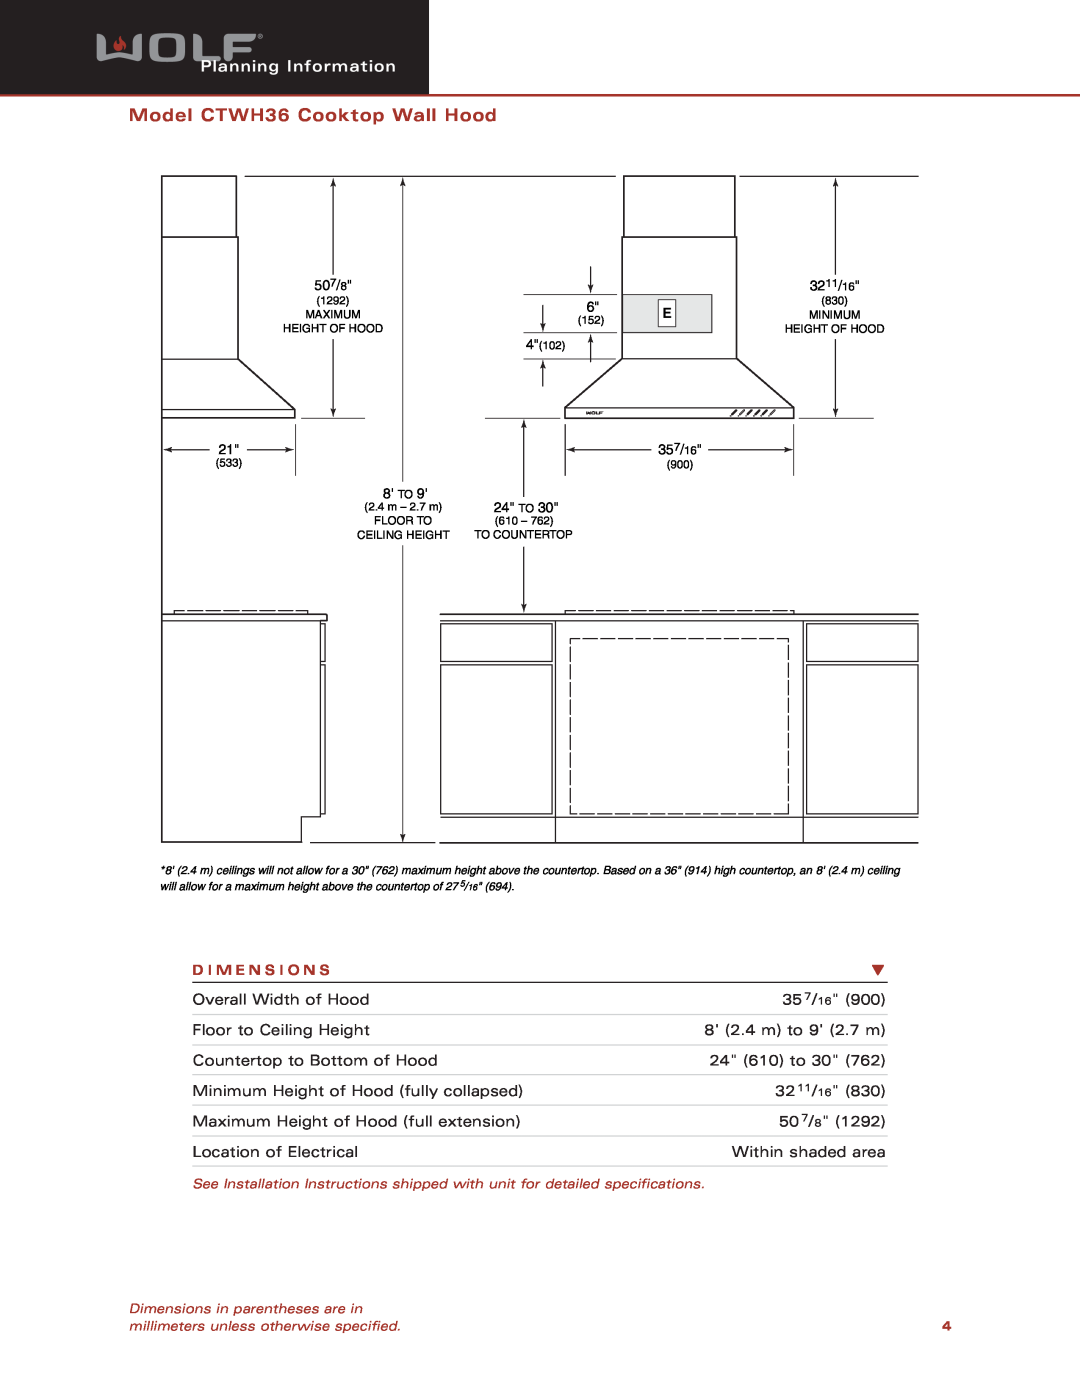 Wolf dimensions Model CTWH36 Cooktop Wall Hood, Planning Information, D I M E N S I O N S 